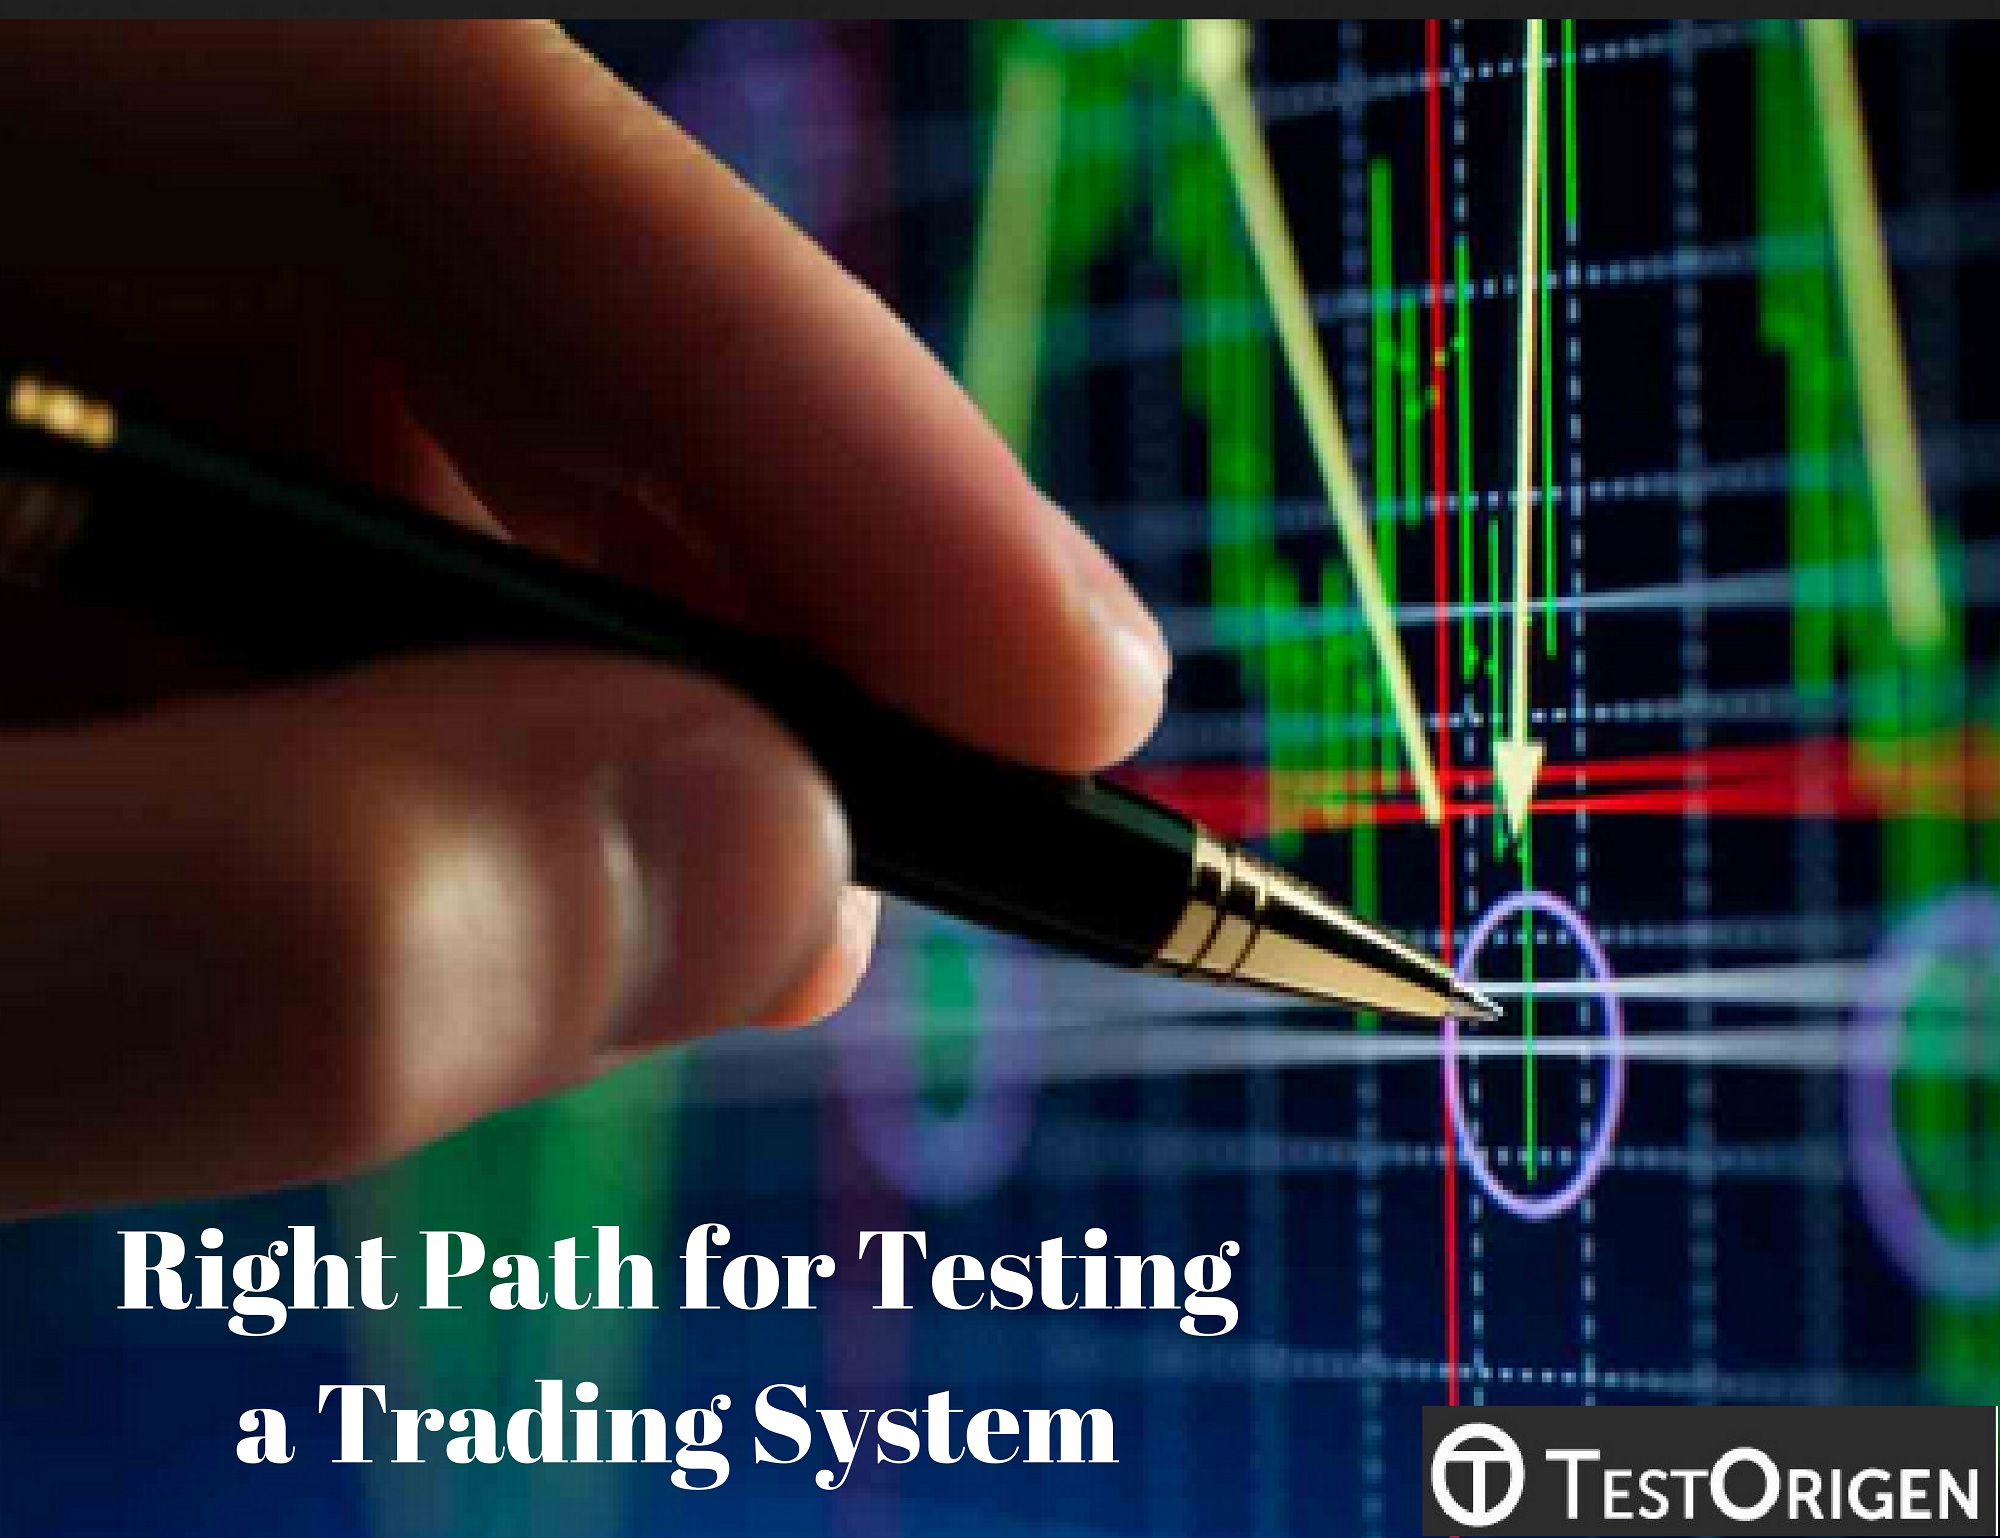 Right Path for Testing a Trading System